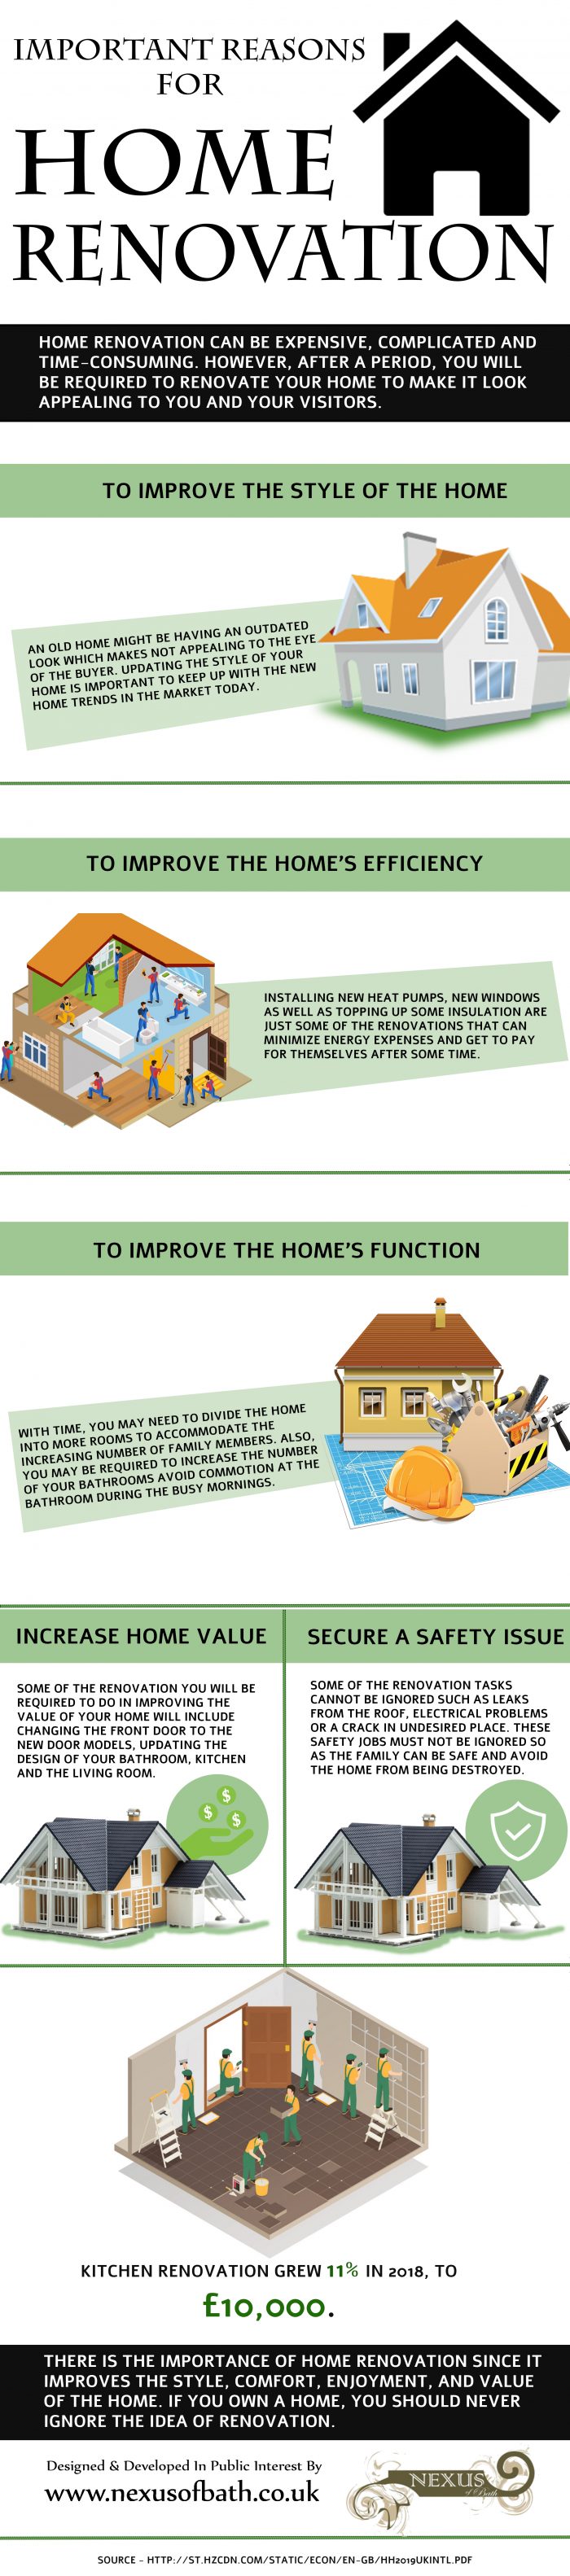 Important reasons for home renovation